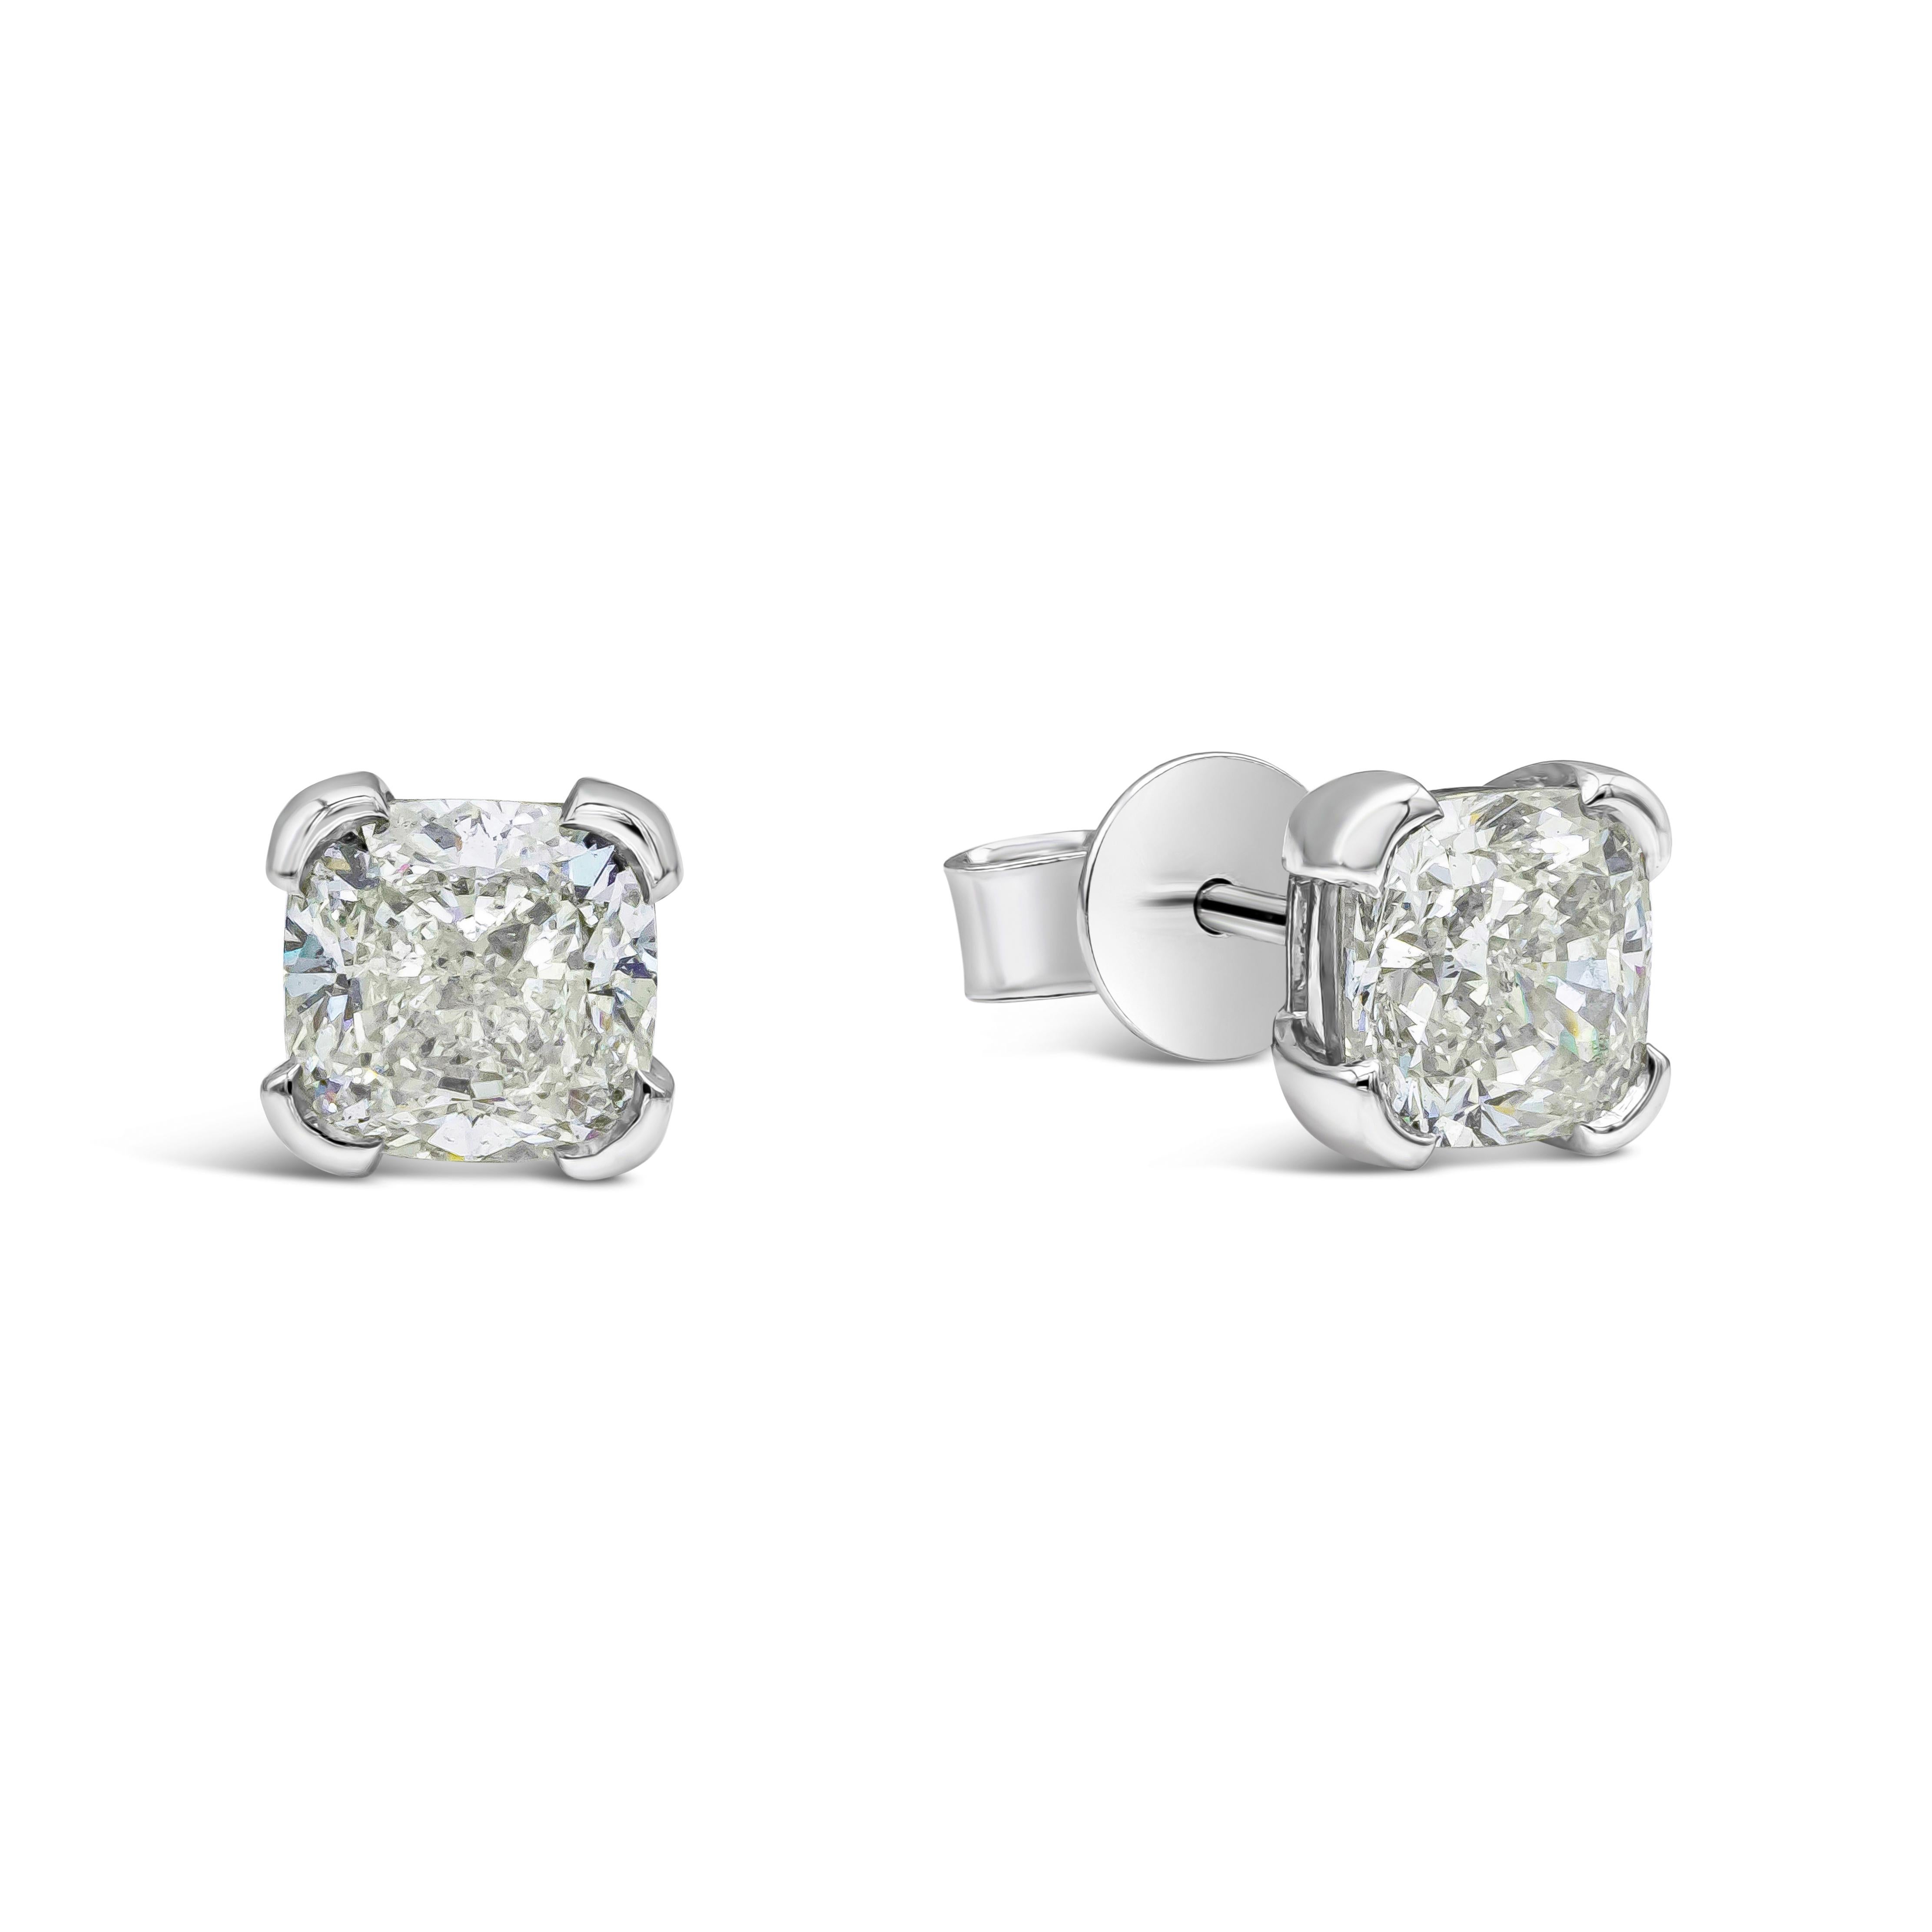 Classic pair of stud earrings showcasing two GIA Certified cushion cut diamonds, each weighing 1.51 carats, I Color and SI2 in Clarity. Set in a simple four prong, Made with Platinum./

Roman Malakov is a custom house, specializing in creating